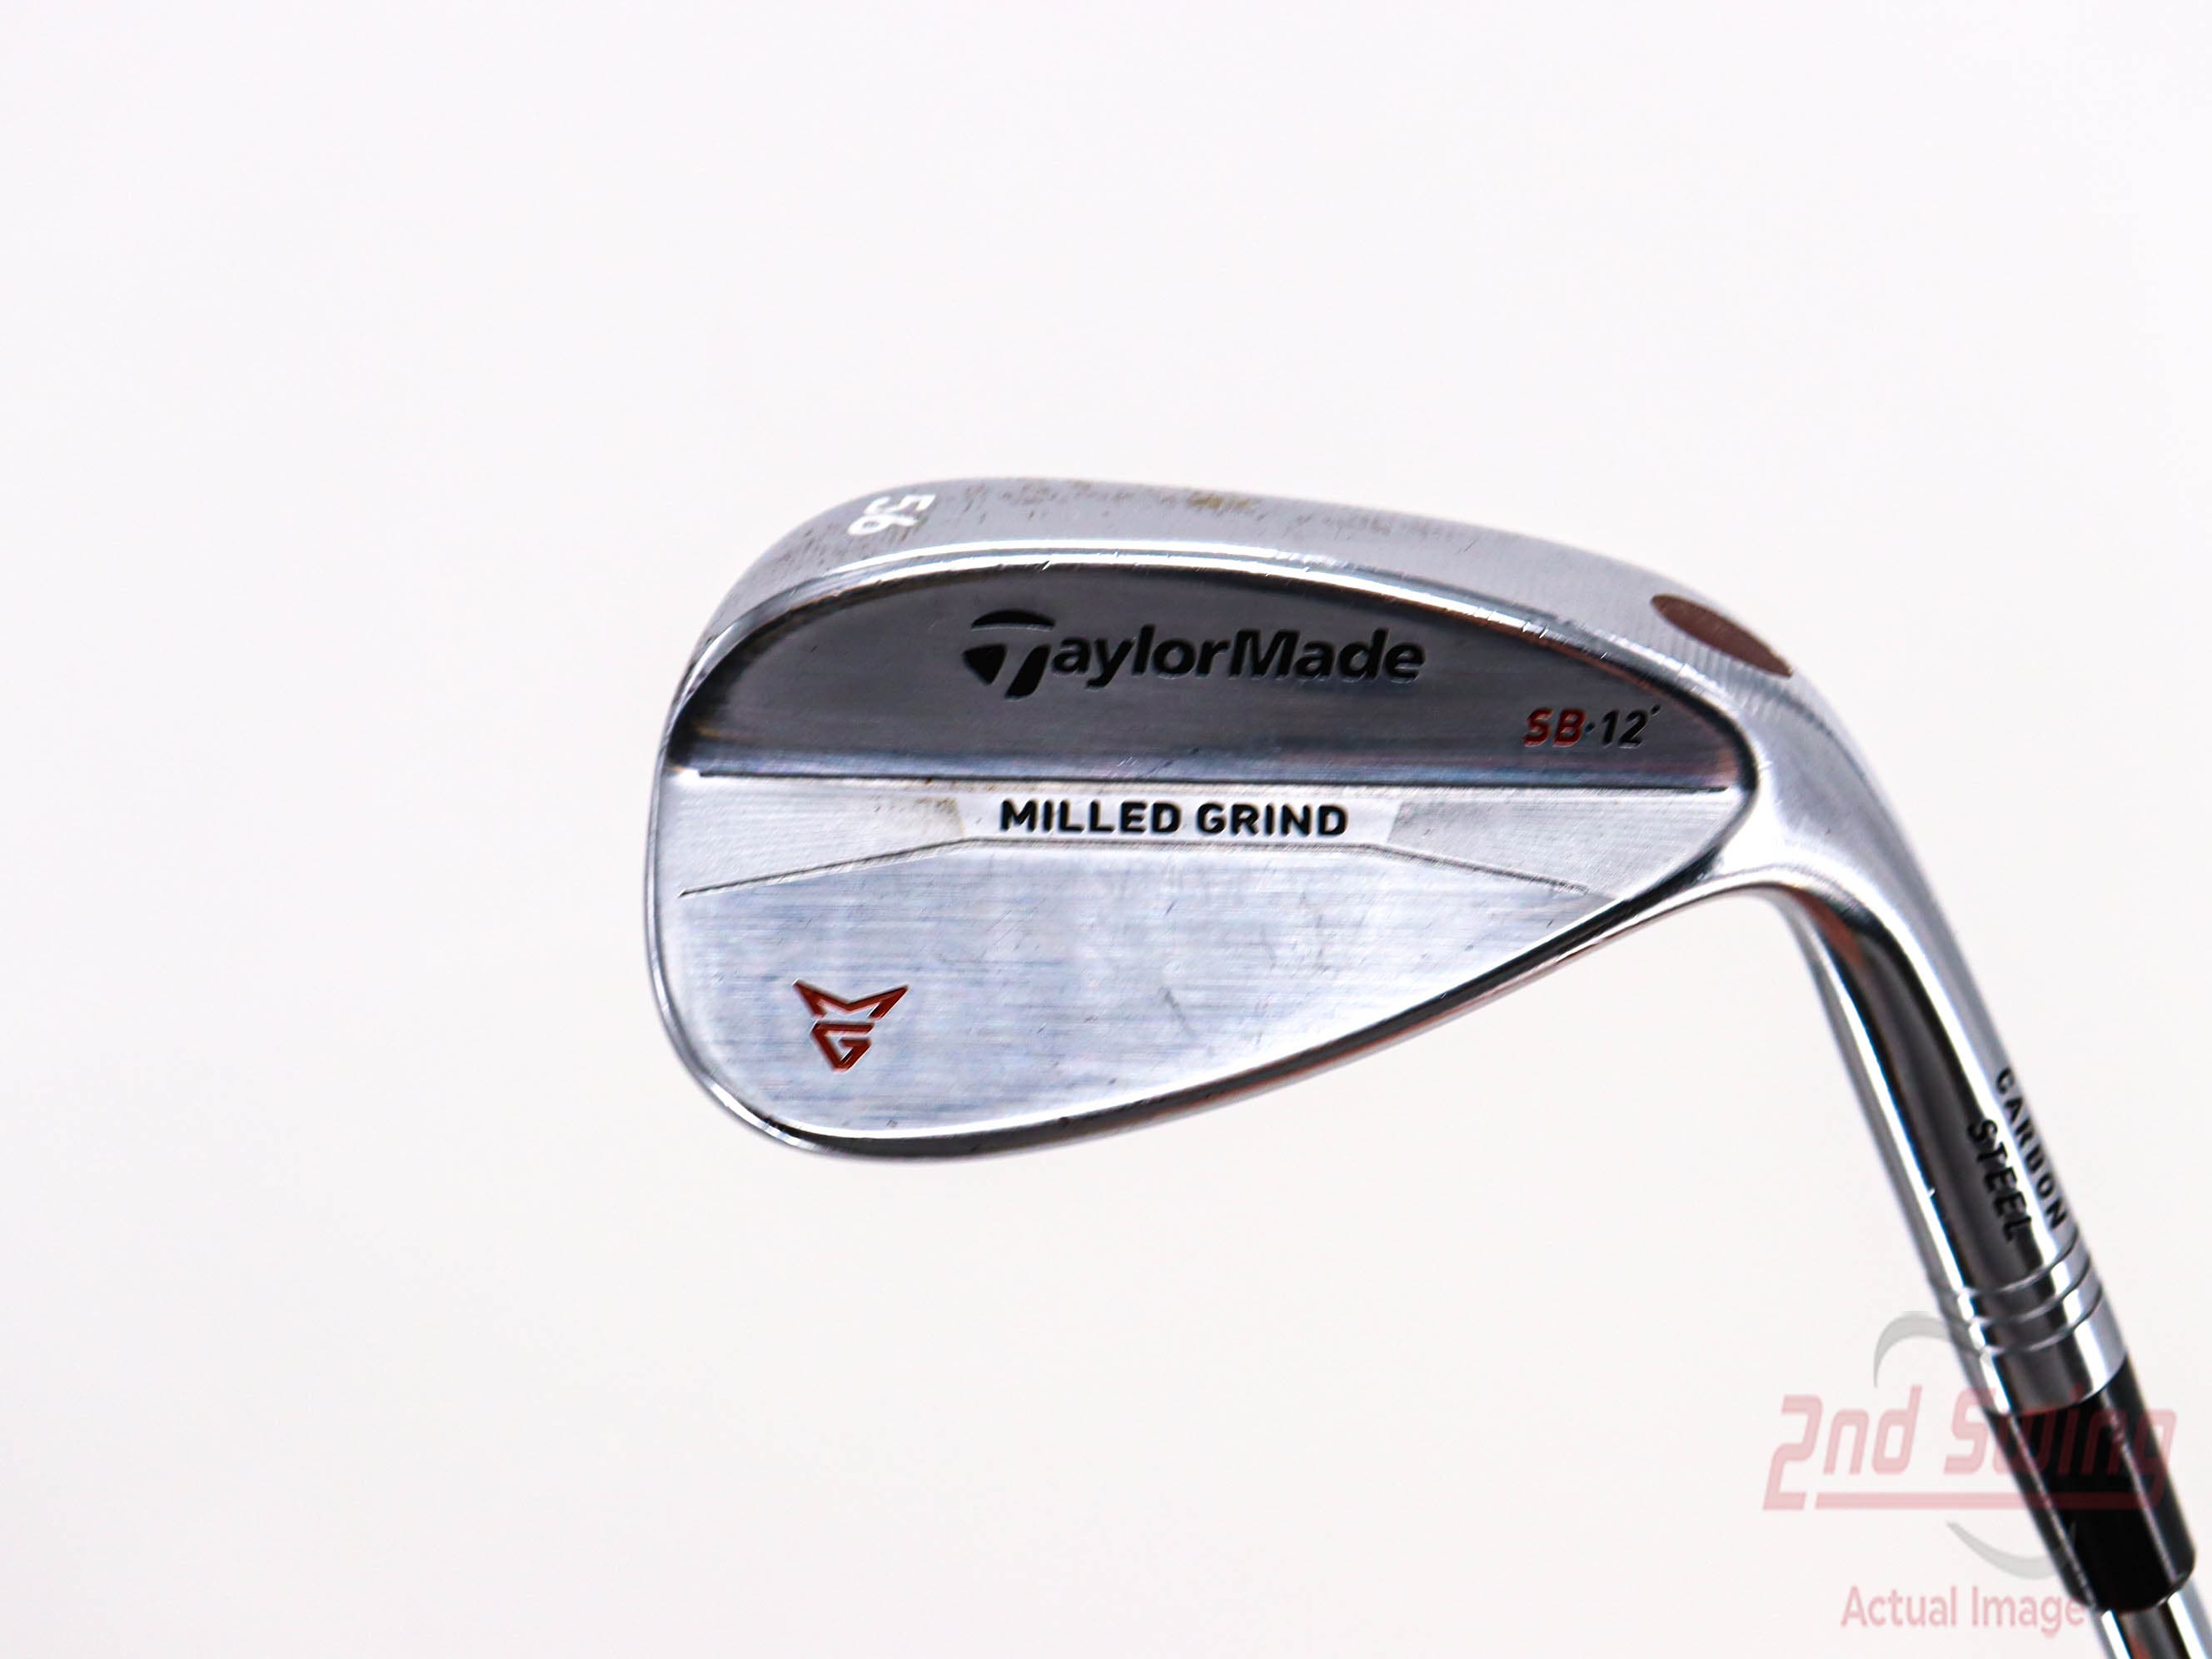 TaylorMade Milled Grind Satin Chrome Wedge (D-92334012890) | 2nd